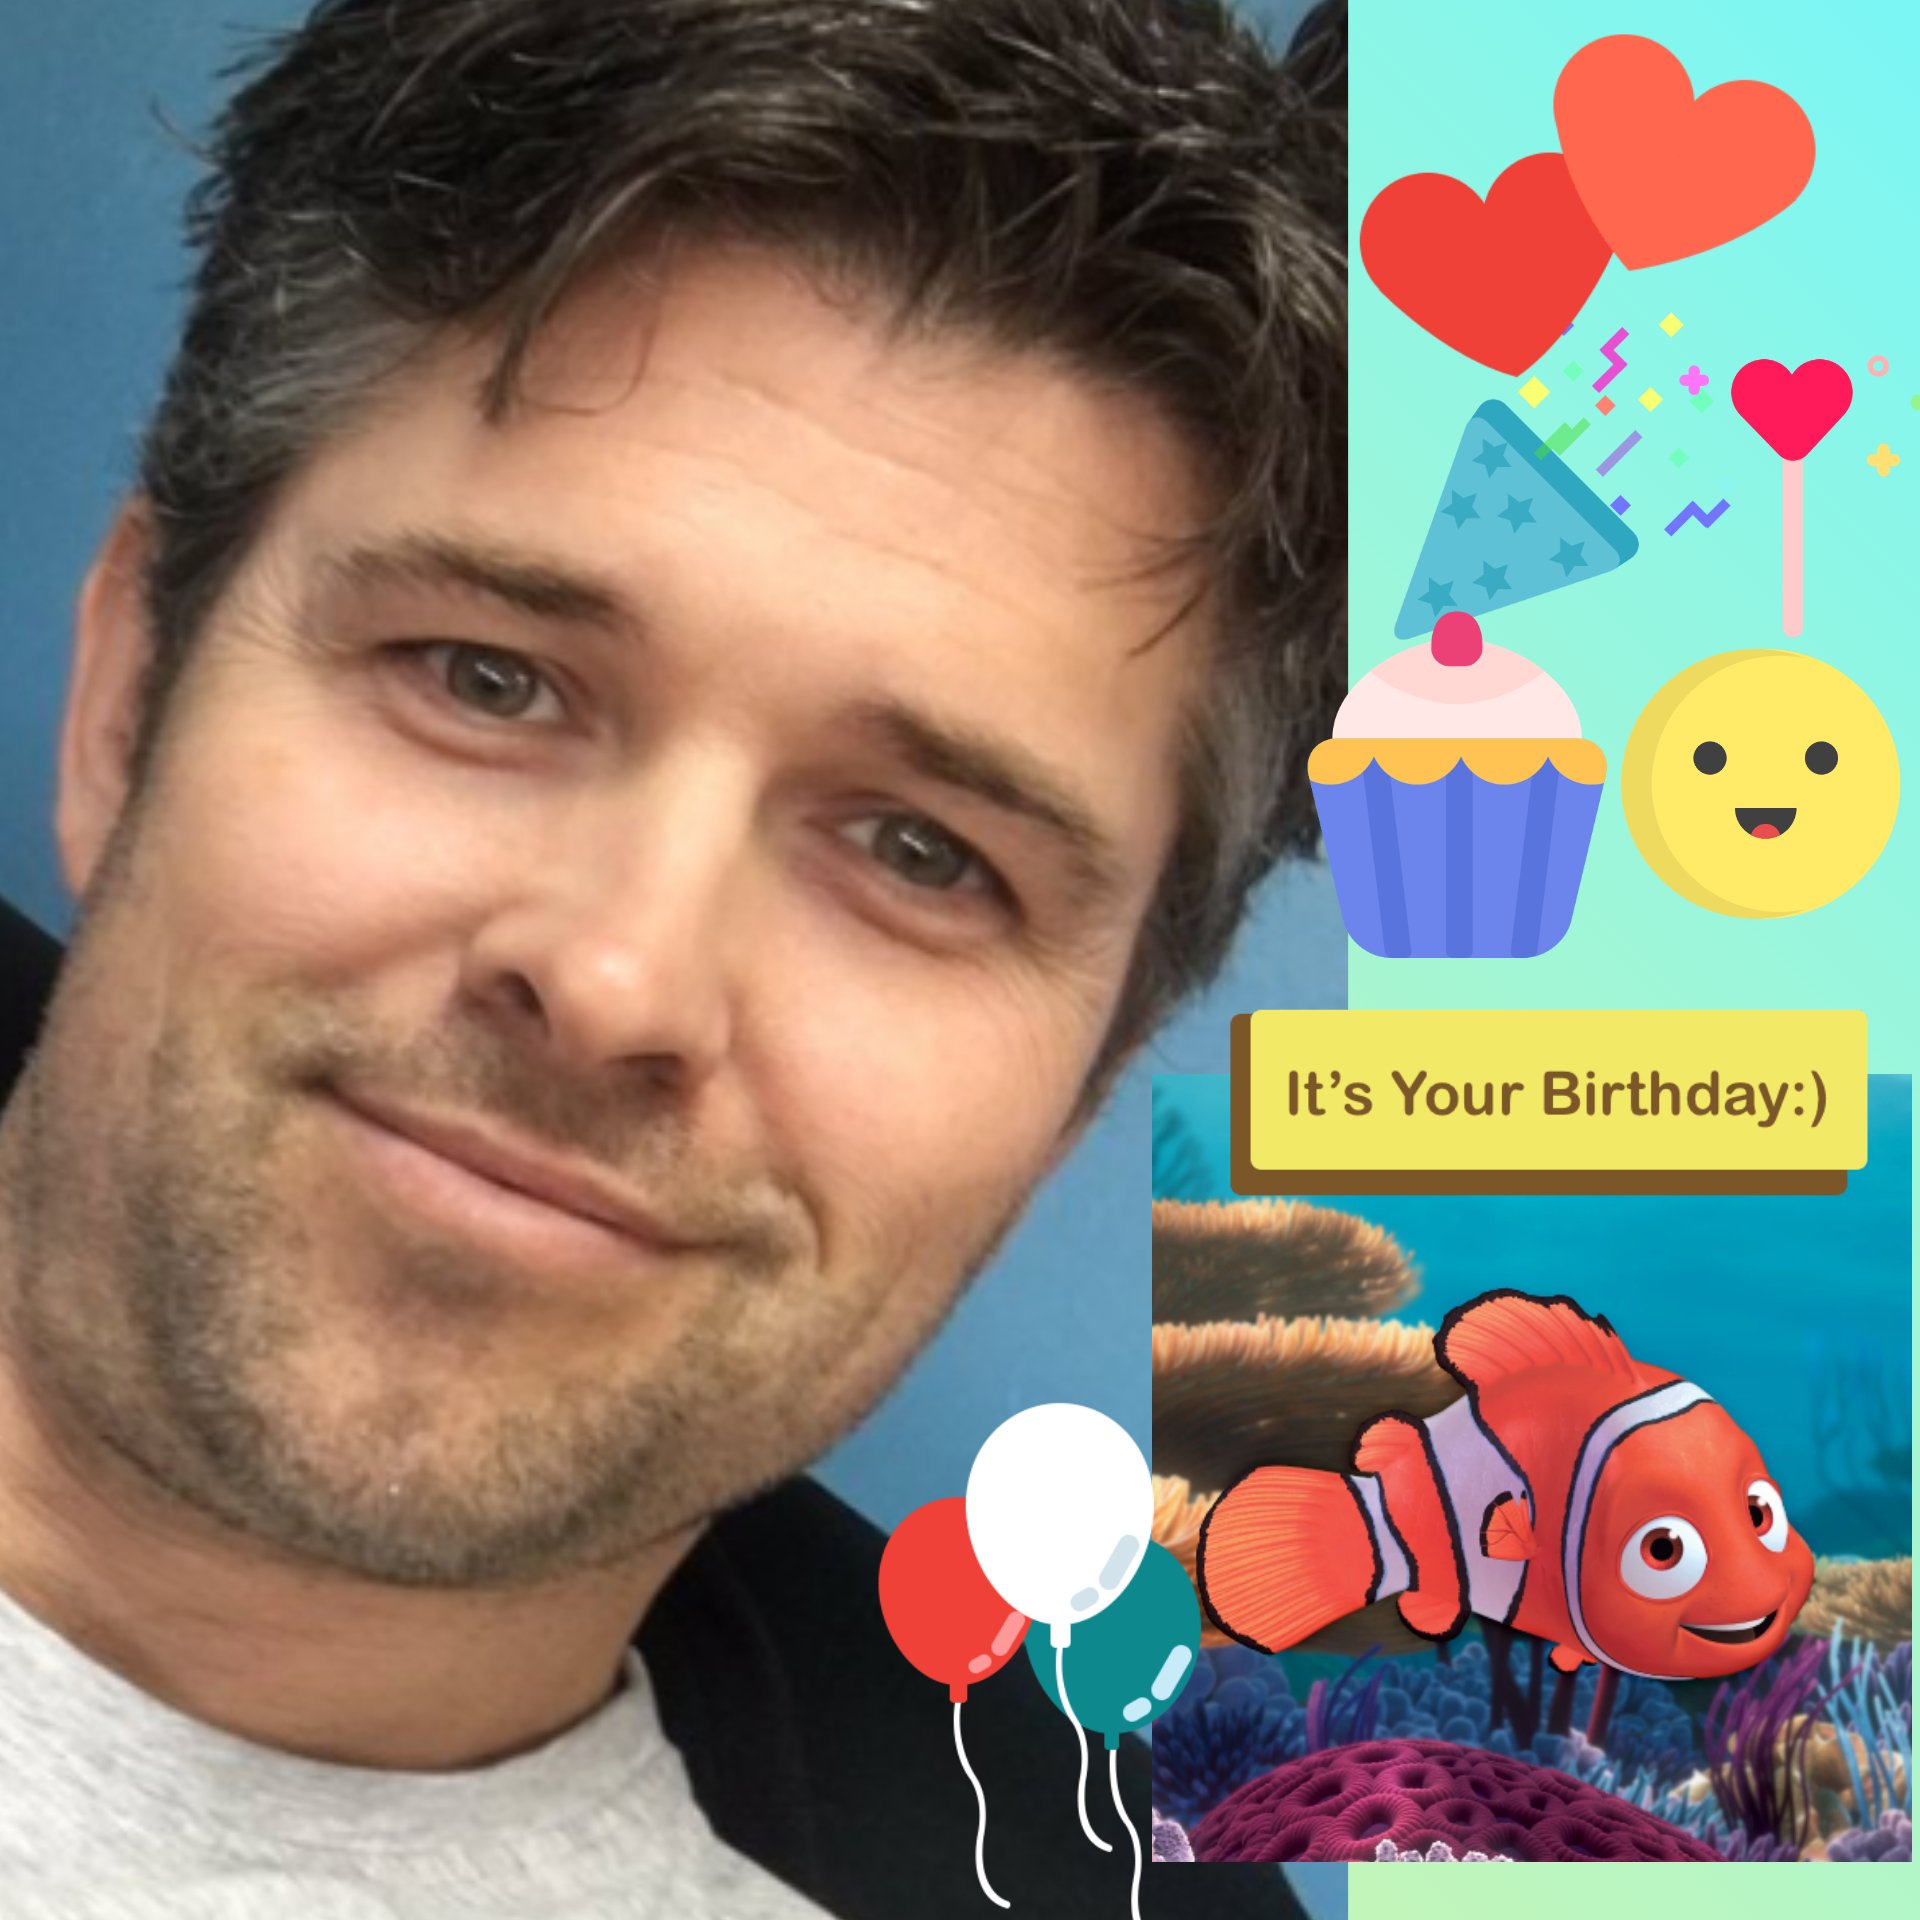 Happy birthday from NZ to (I put Nemo because it matches his surname, lol) 